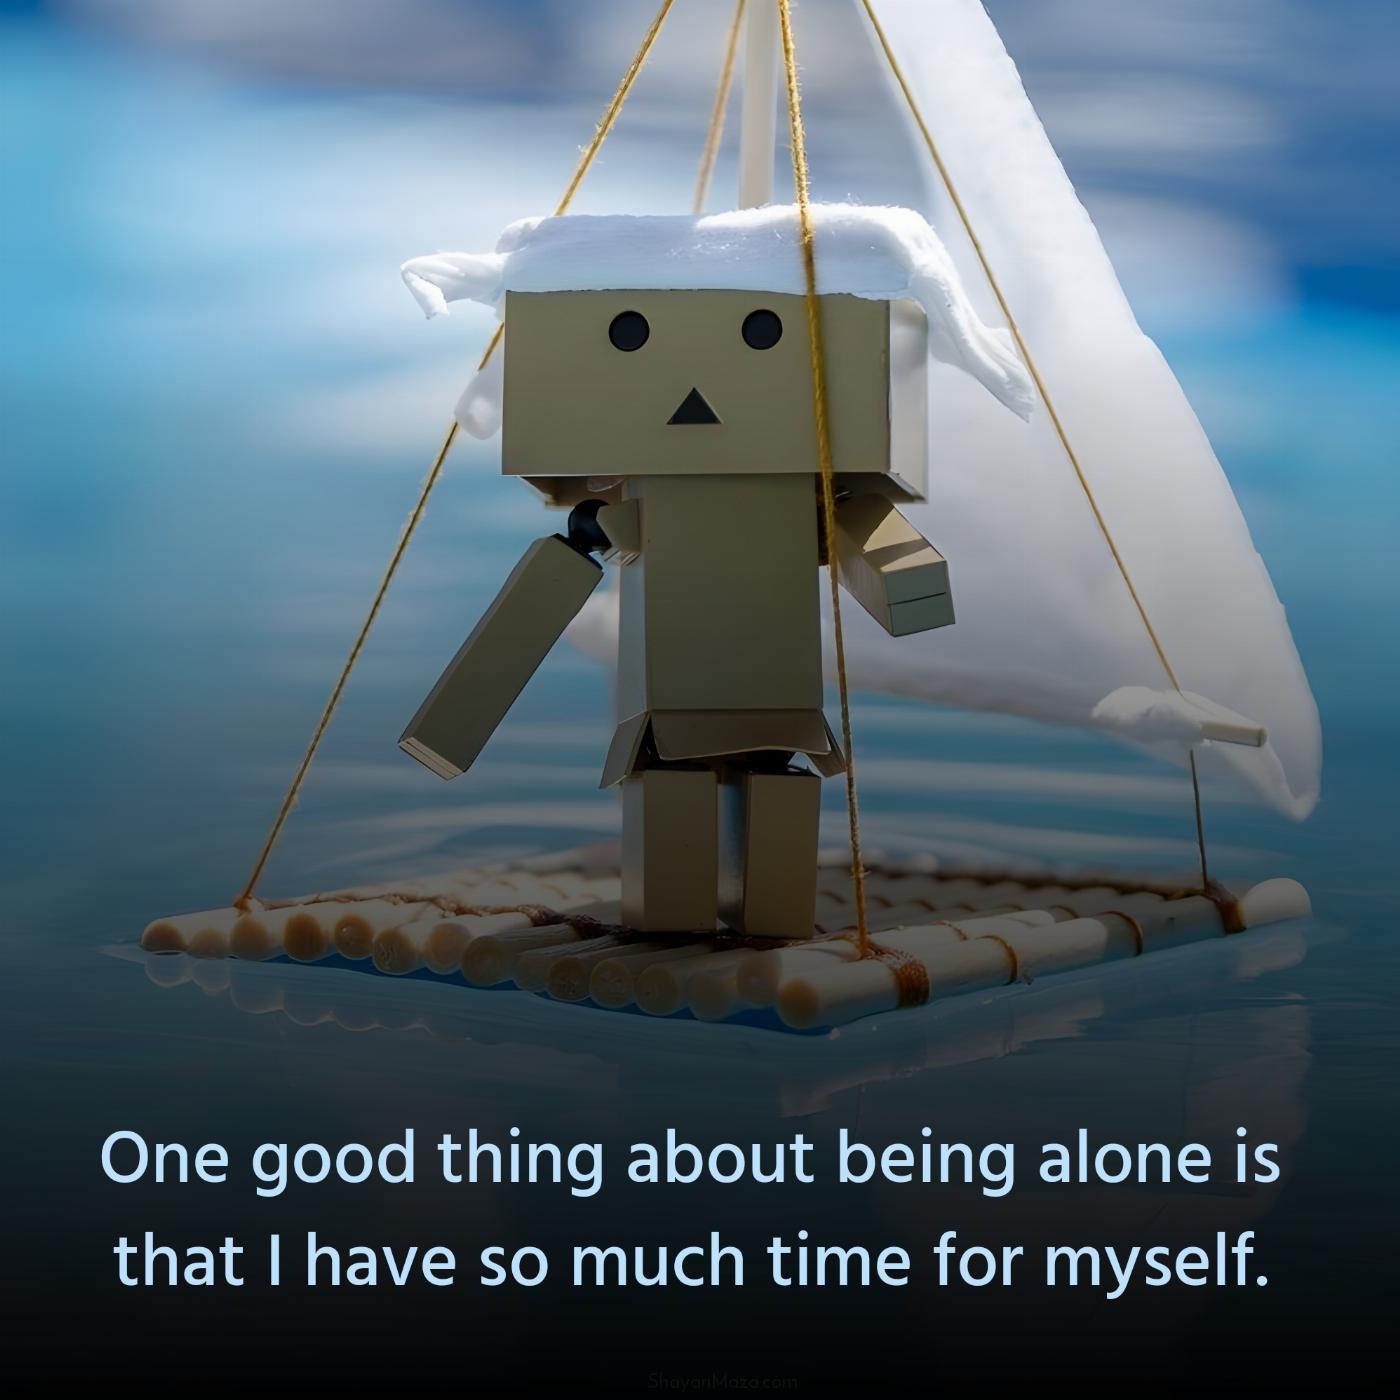 One good thing about being alone is that I have so much time